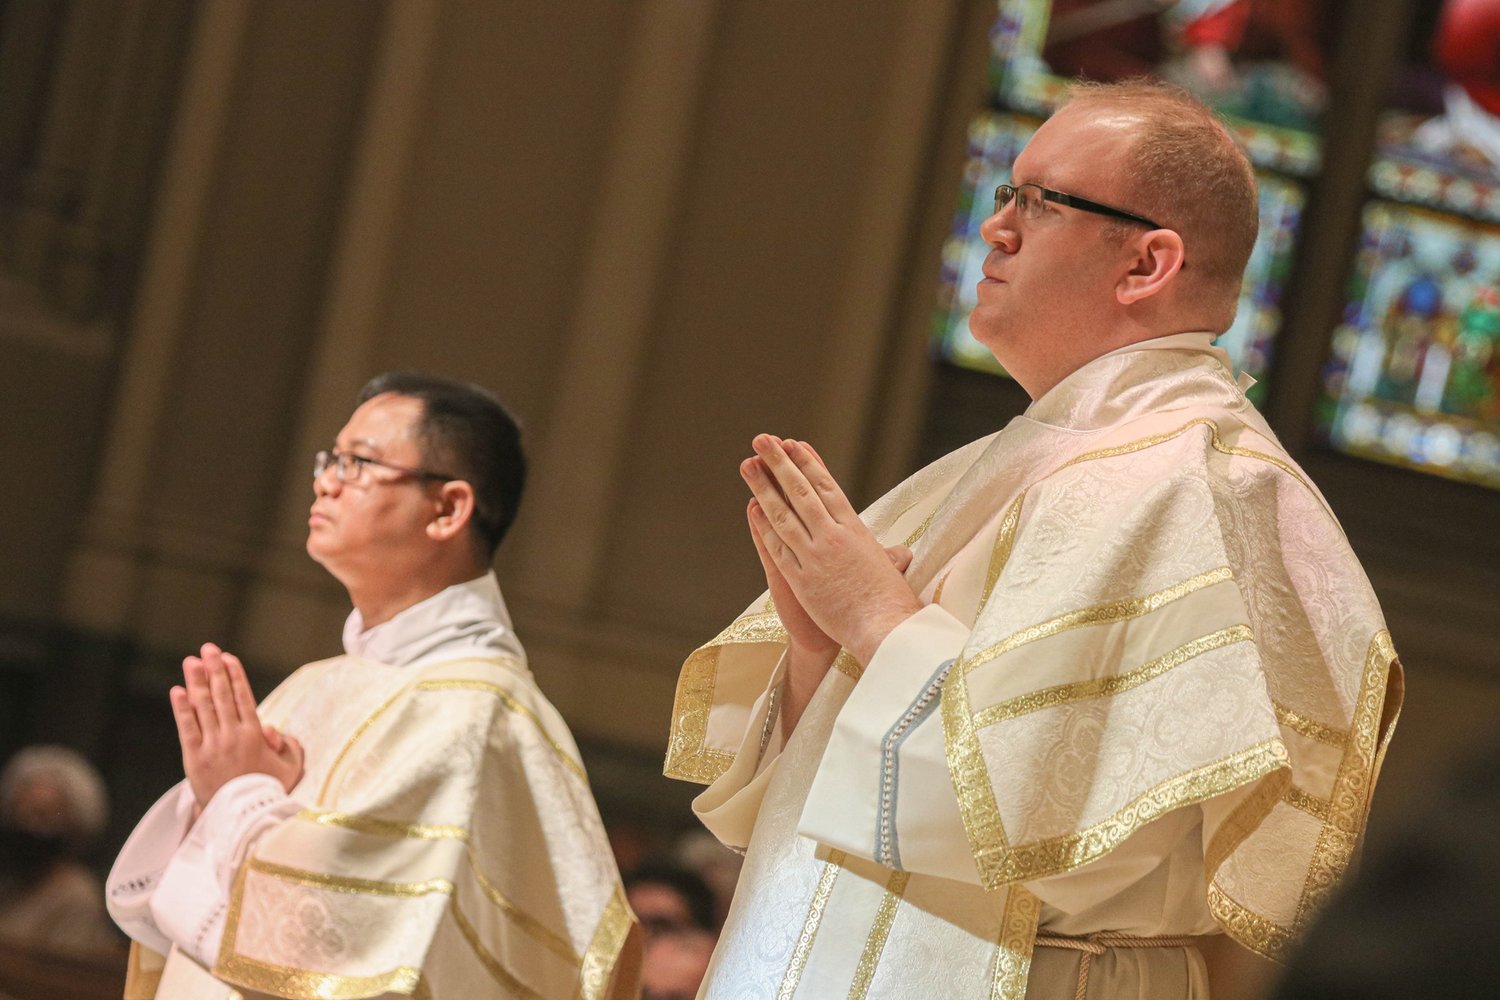 From left to right, Rev. Mr. Doan V. Nguyen and Rev. Mr. Daniel M. Mahoney during their ordination to the Sacred Order of the Diaconate in 2020. They will both be ordained to the priesthood on June 5, 2021. Look for full coverage of the ordination in the June 10 edition of Rhode Island Catholic.